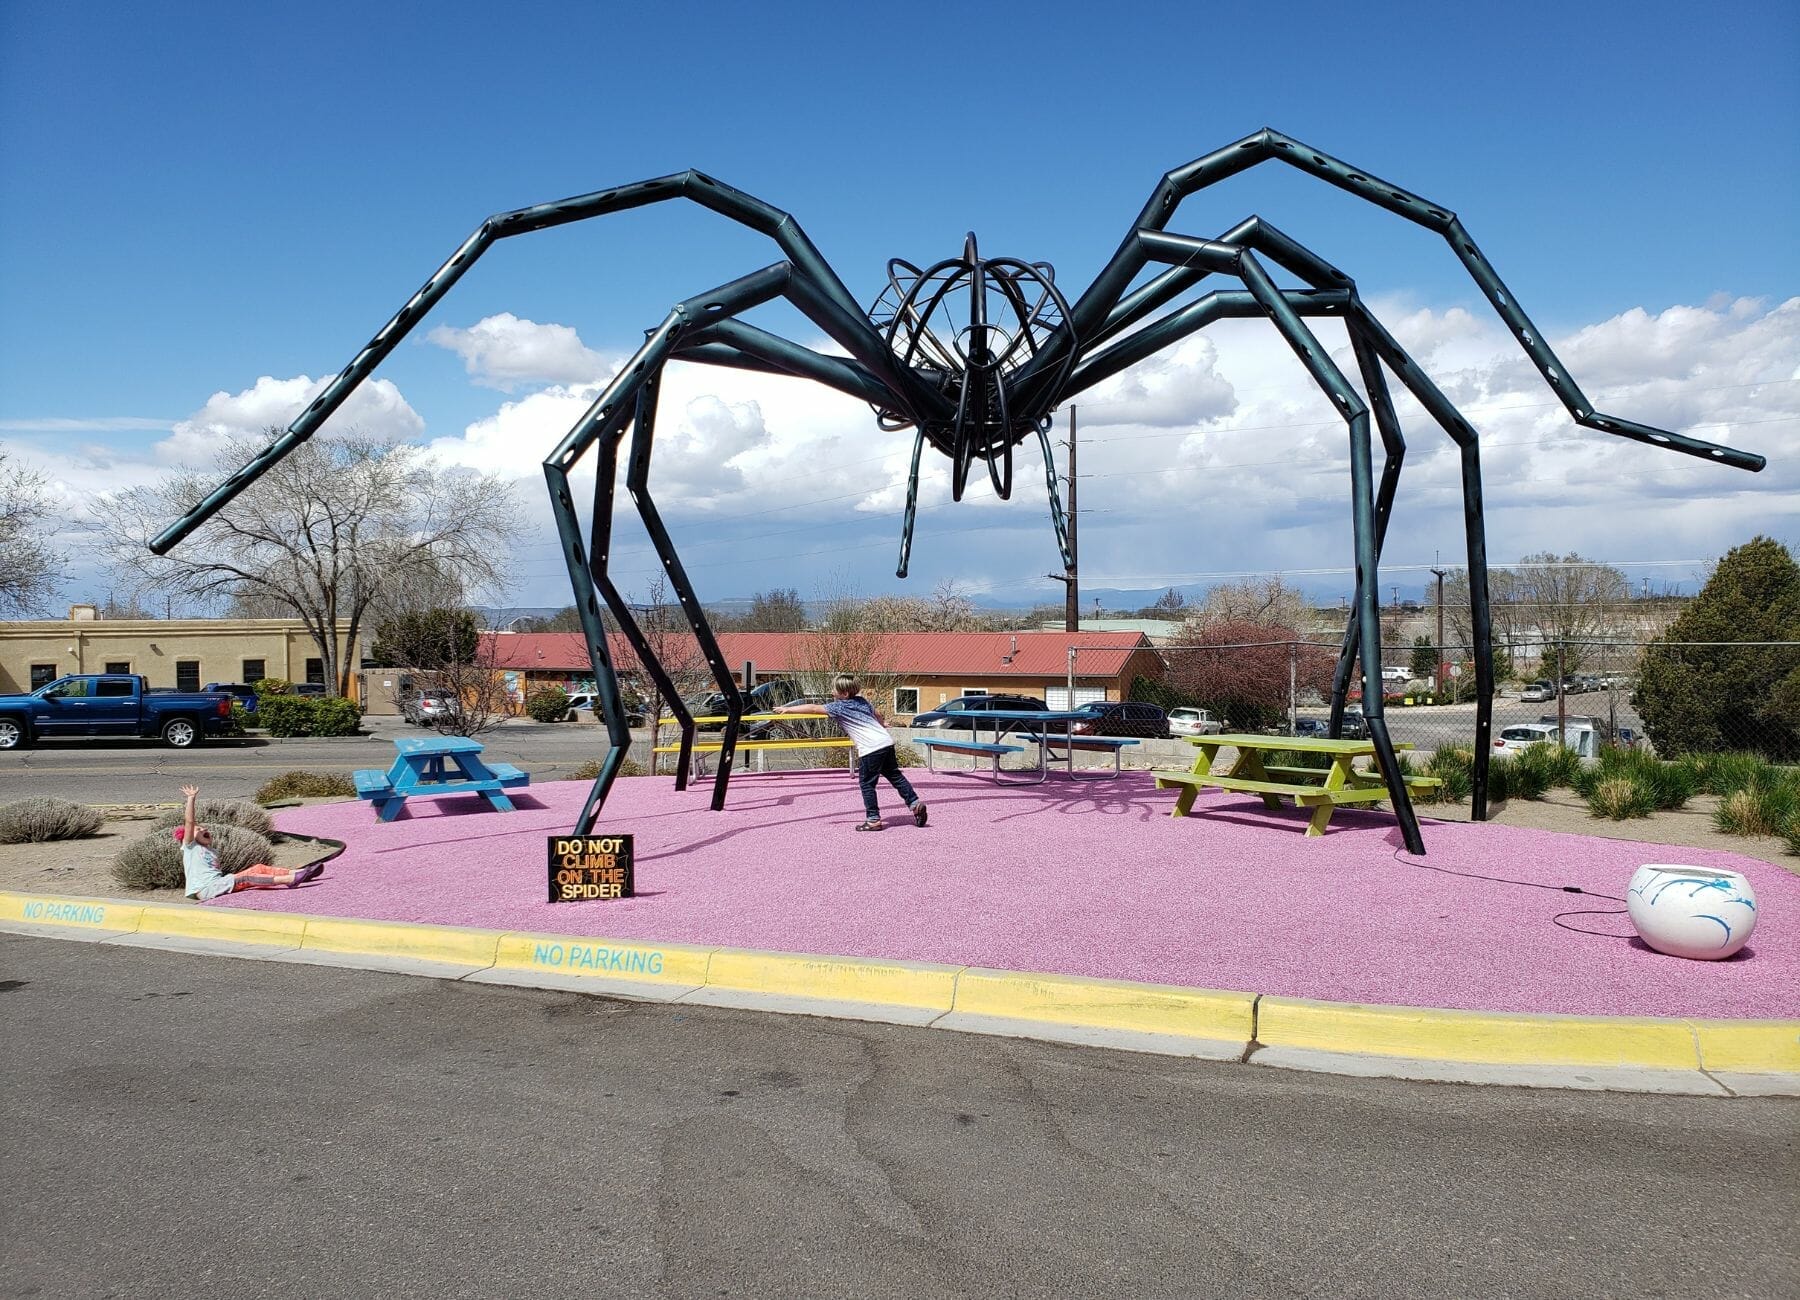 Meow Wolf Review Which Meow Wolf Location is Best?